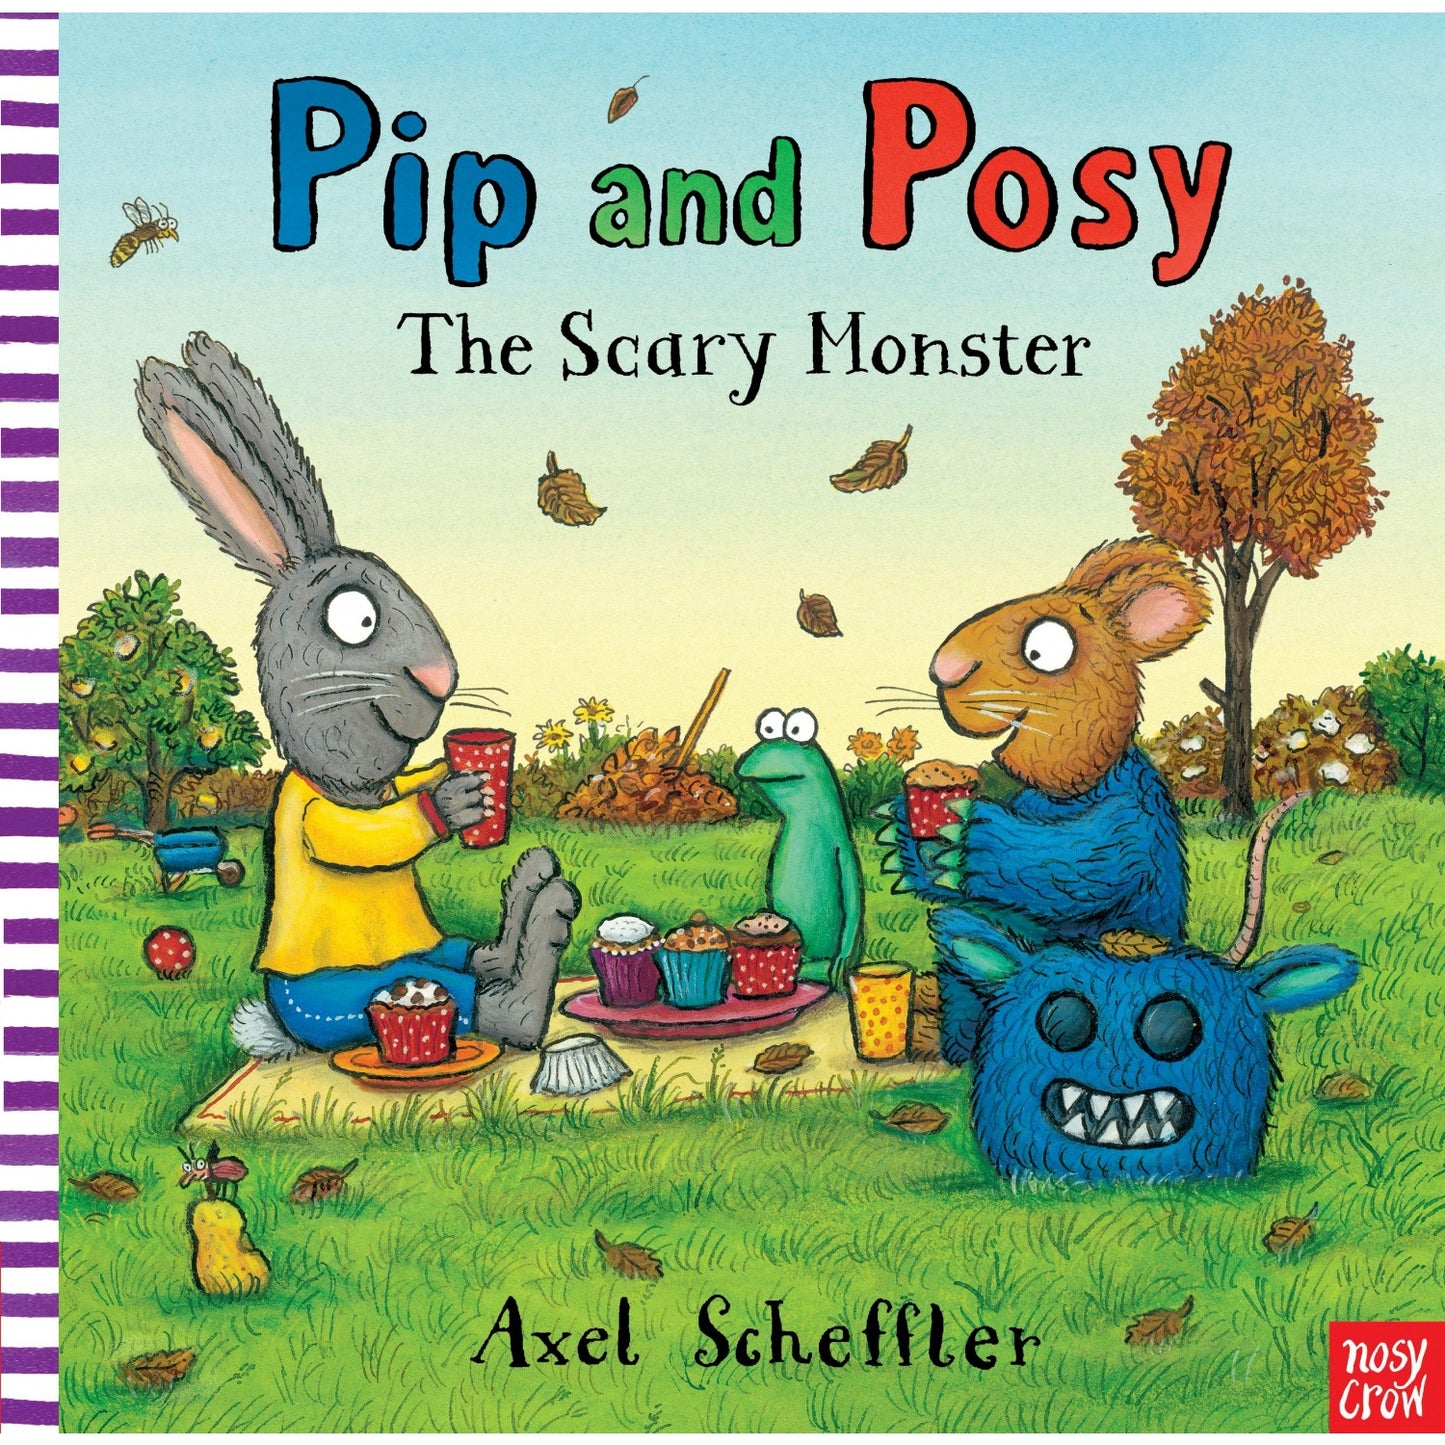 The Scary Monster  - Pip & Posy | Paperback | Toddler’s Book on Friendship